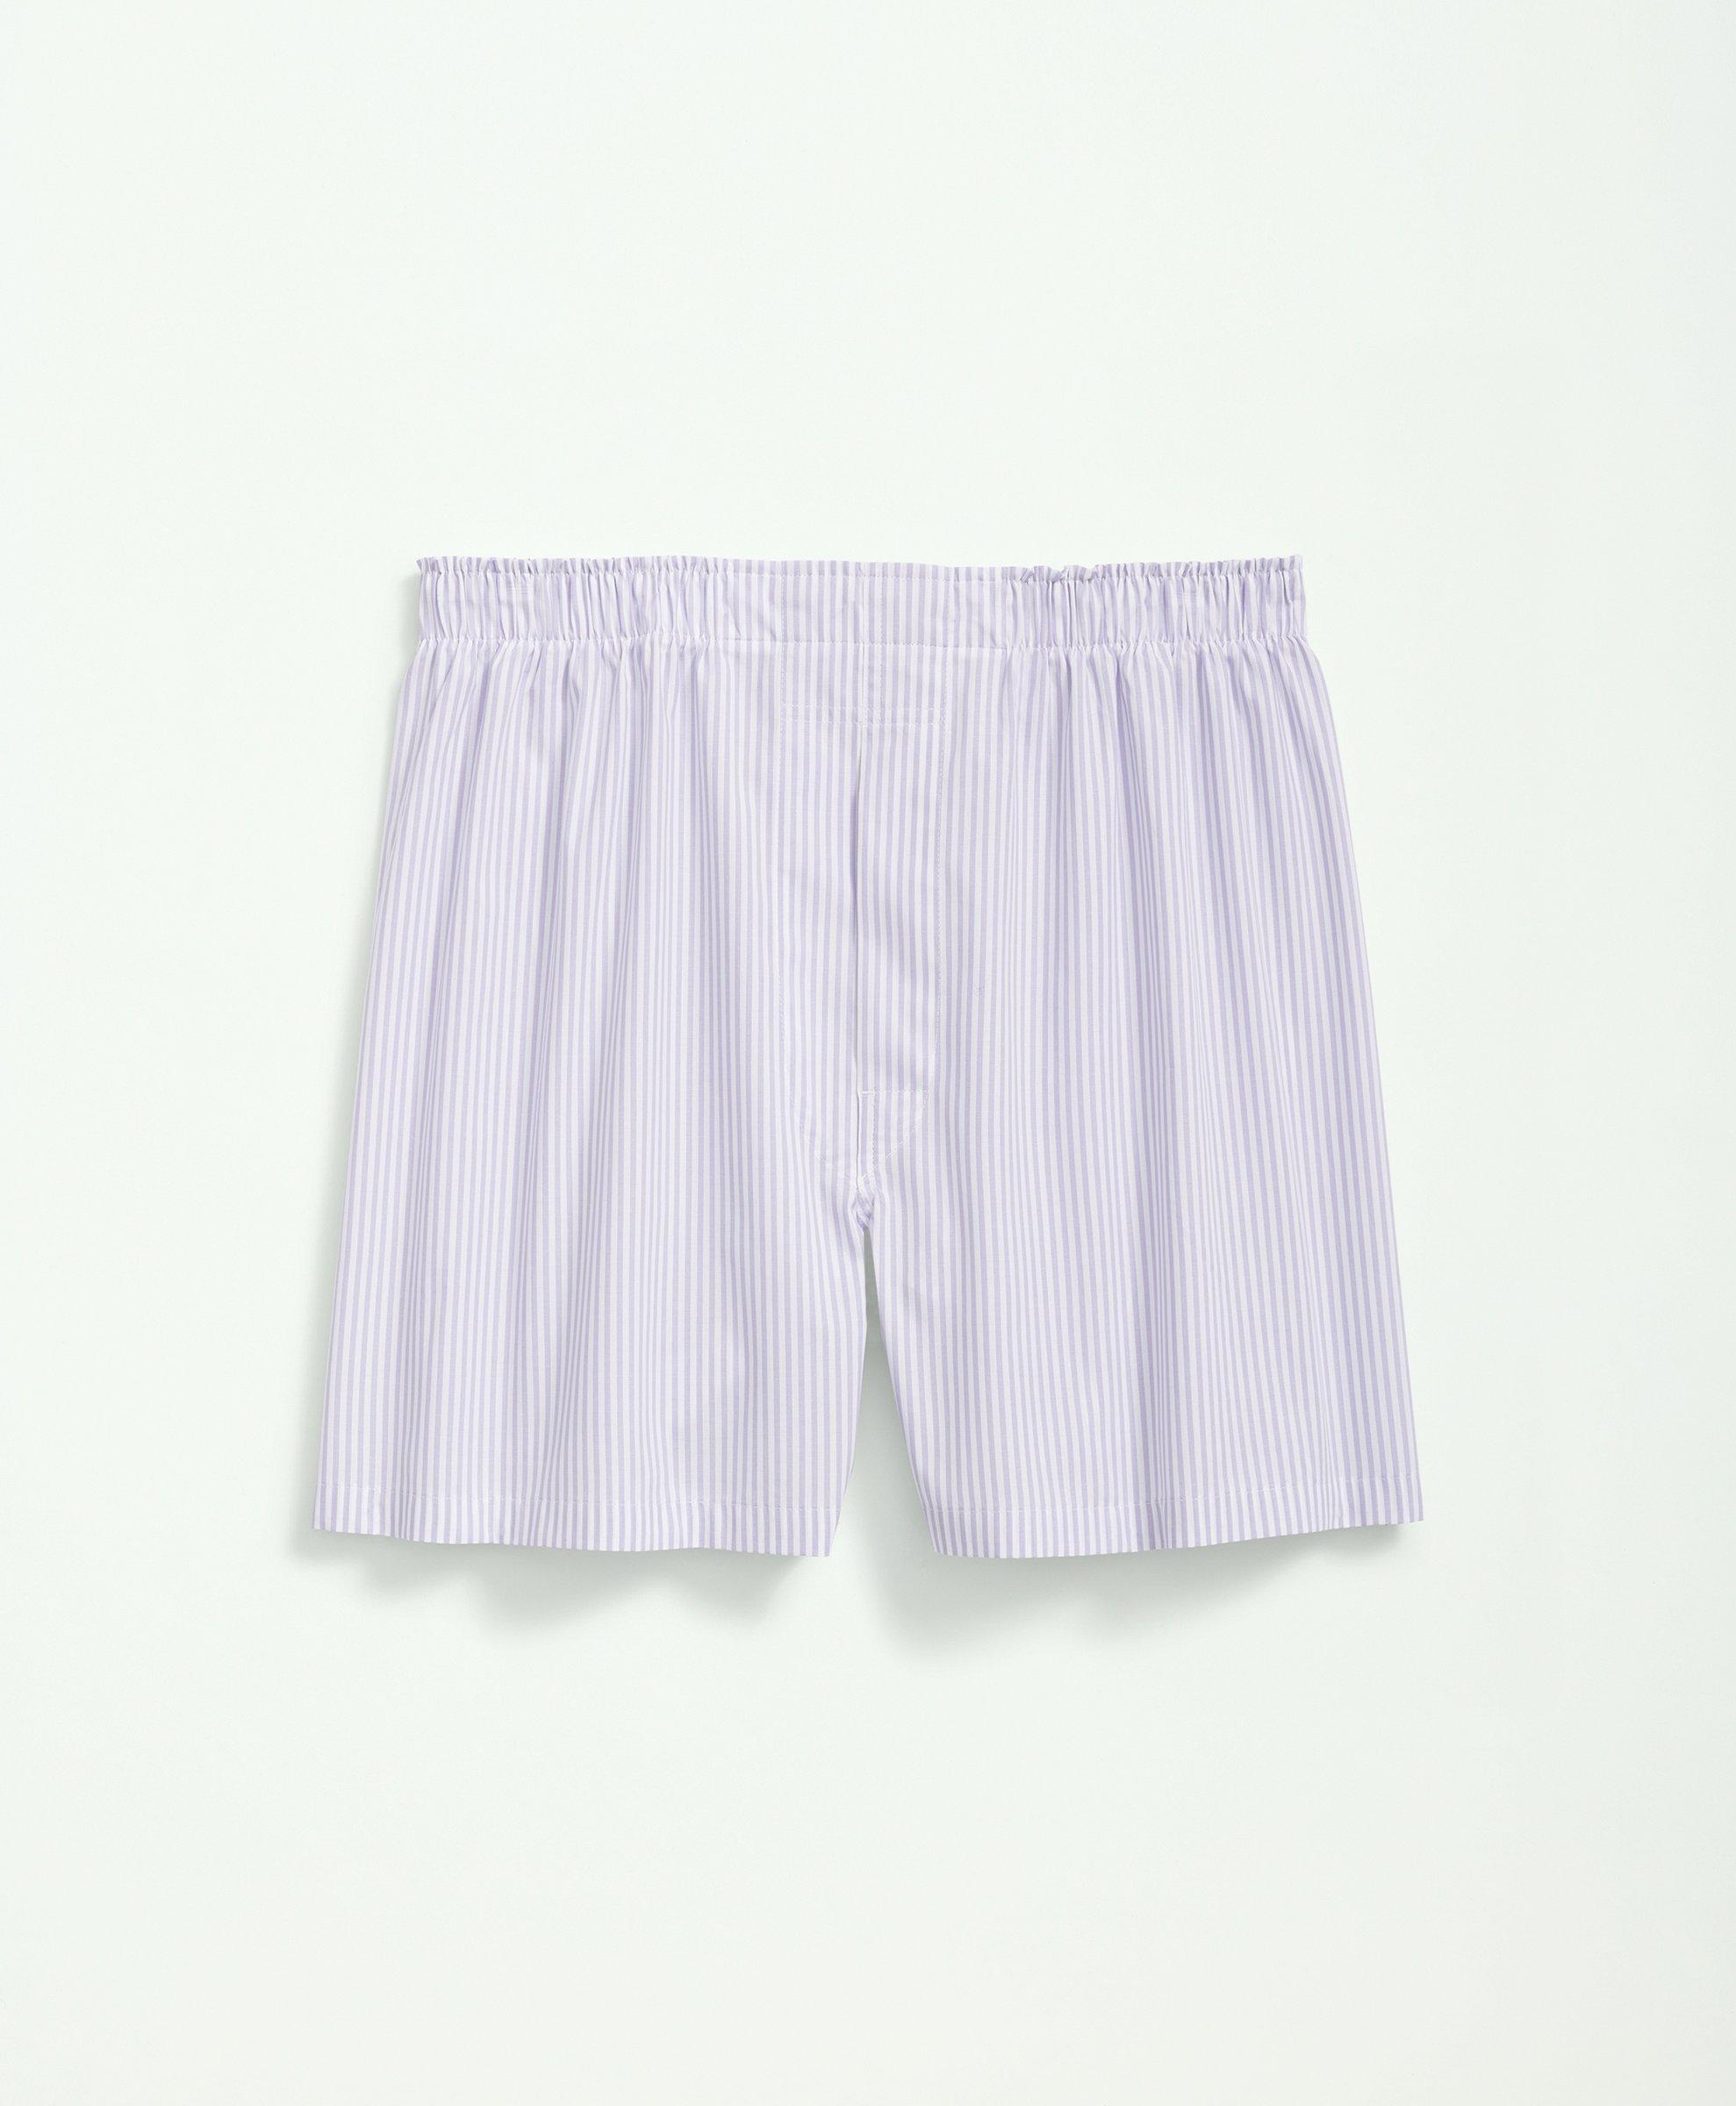 Brooks Brothers Cotton Broadcloth Striped Boxers | Lavender | Size Medium